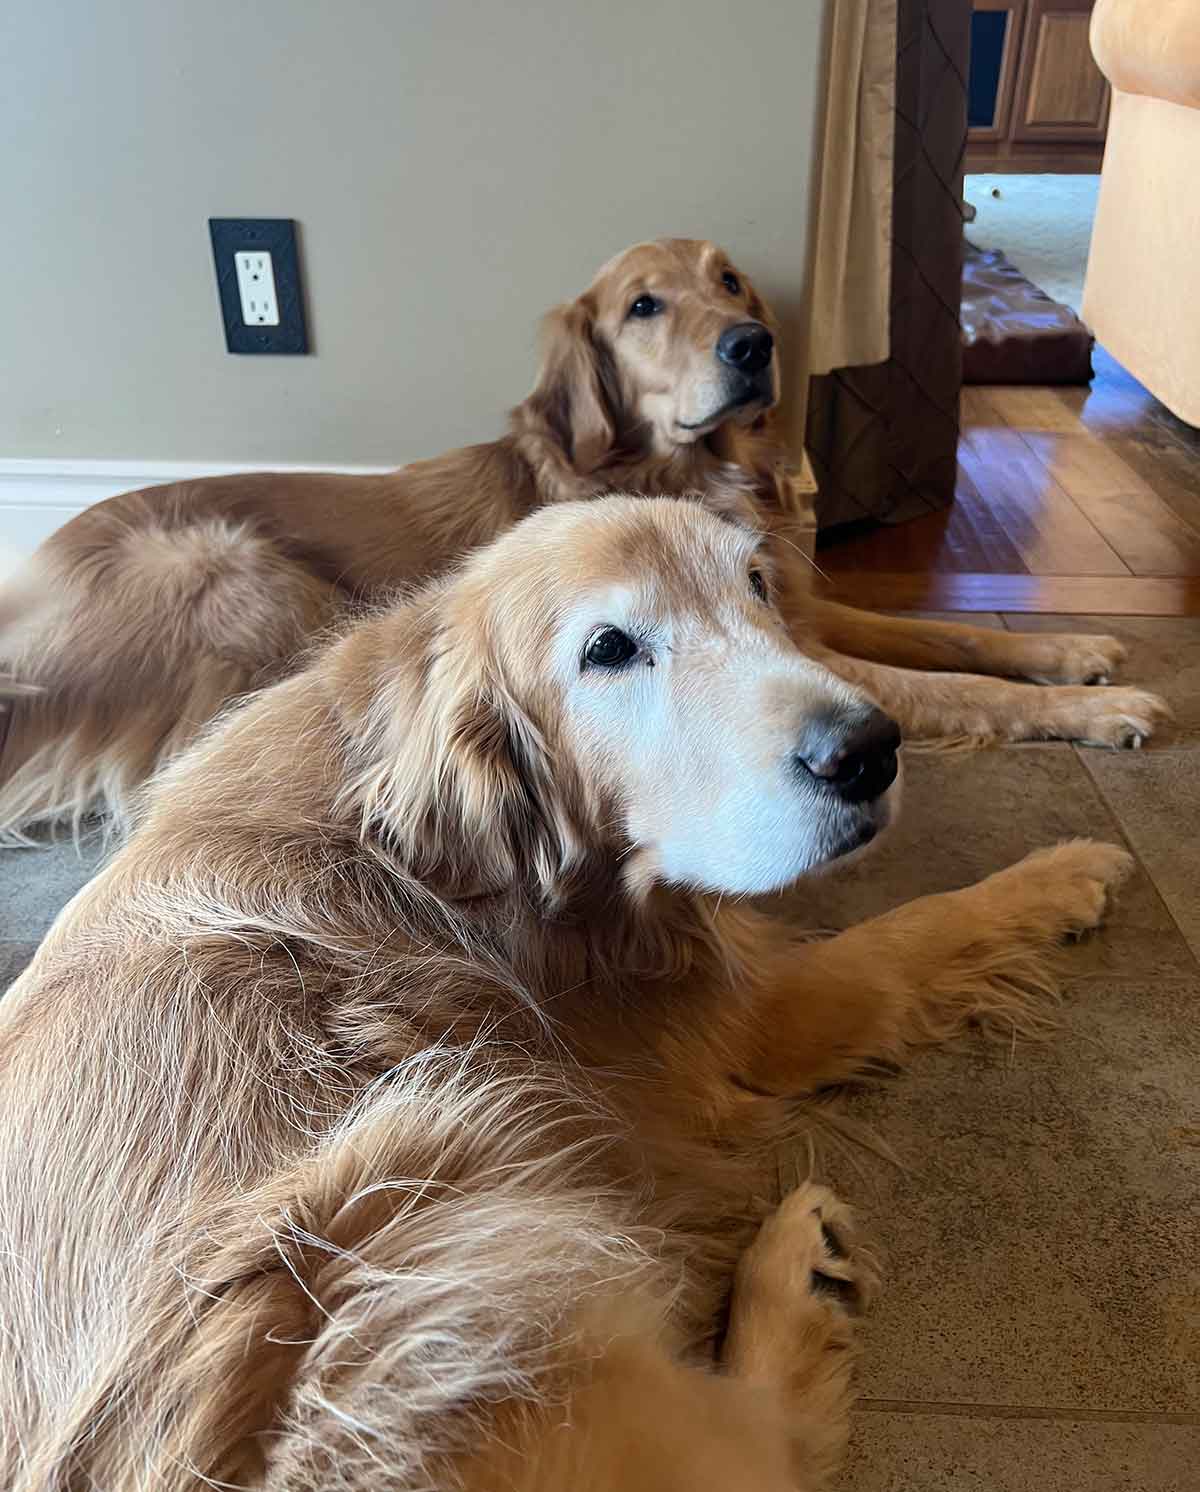 Two golden retriever dogs laying next to each other on the floor looking beyond behind the camera.